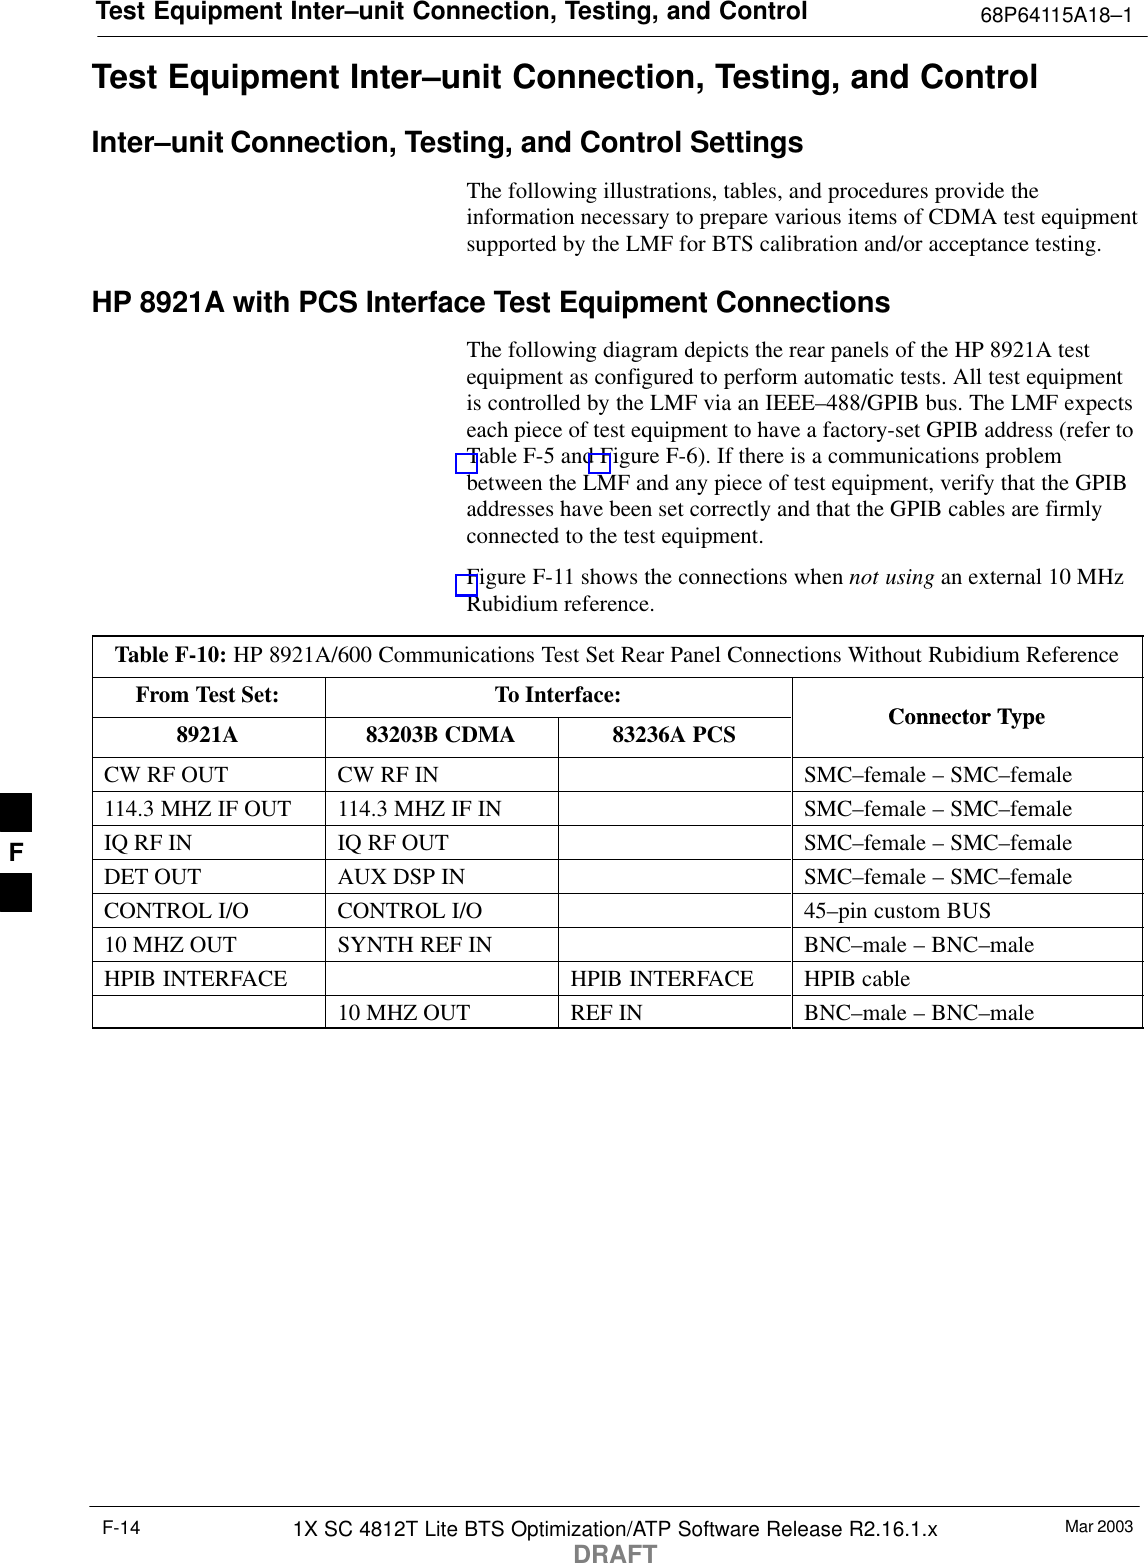 Test Equipment Inter–unit Connection, Testing, and Control 68P64115A18–1Mar 20031X SC 4812T Lite BTS Optimization/ATP Software Release R2.16.1.xDRAFTF-14Test Equipment Inter–unit Connection, Testing, and ControlInter–unit Connection, Testing, and Control SettingsThe following illustrations, tables, and procedures provide theinformation necessary to prepare various items of CDMA test equipmentsupported by the LMF for BTS calibration and/or acceptance testing.HP 8921A with PCS Interface Test Equipment ConnectionsThe following diagram depicts the rear panels of the HP 8921A testequipment as configured to perform automatic tests. All test equipmentis controlled by the LMF via an IEEE–488/GPIB bus. The LMF expectseach piece of test equipment to have a factory-set GPIB address (refer toTable F-5 and Figure F-6). If there is a communications problembetween the LMF and any piece of test equipment, verify that the GPIBaddresses have been set correctly and that the GPIB cables are firmlyconnected to the test equipment.Figure F-11 shows the connections when not using an external 10 MHzRubidium reference.Table F-10: HP 8921A/600 Communications Test Set Rear Panel Connections Without Rubidium ReferenceFrom Test Set: To Interface:Connector Type8921A 83203B CDMA 83236A PCSConnector TypeCW RF OUT CW RF IN SMC–female – SMC–female114.3 MHZ IF OUT 114.3 MHZ IF IN SMC–female – SMC–femaleIQ RF IN IQ RF OUT SMC–female – SMC–femaleDET OUT AUX DSP IN SMC–female – SMC–femaleCONTROL I/O CONTROL I/O 45–pin custom BUS10 MHZ OUT SYNTH REF IN BNC–male – BNC–maleHPIB INTERFACE HPIB INTERFACE HPIB cable10 MHZ OUT REF IN BNC–male – BNC–maleF